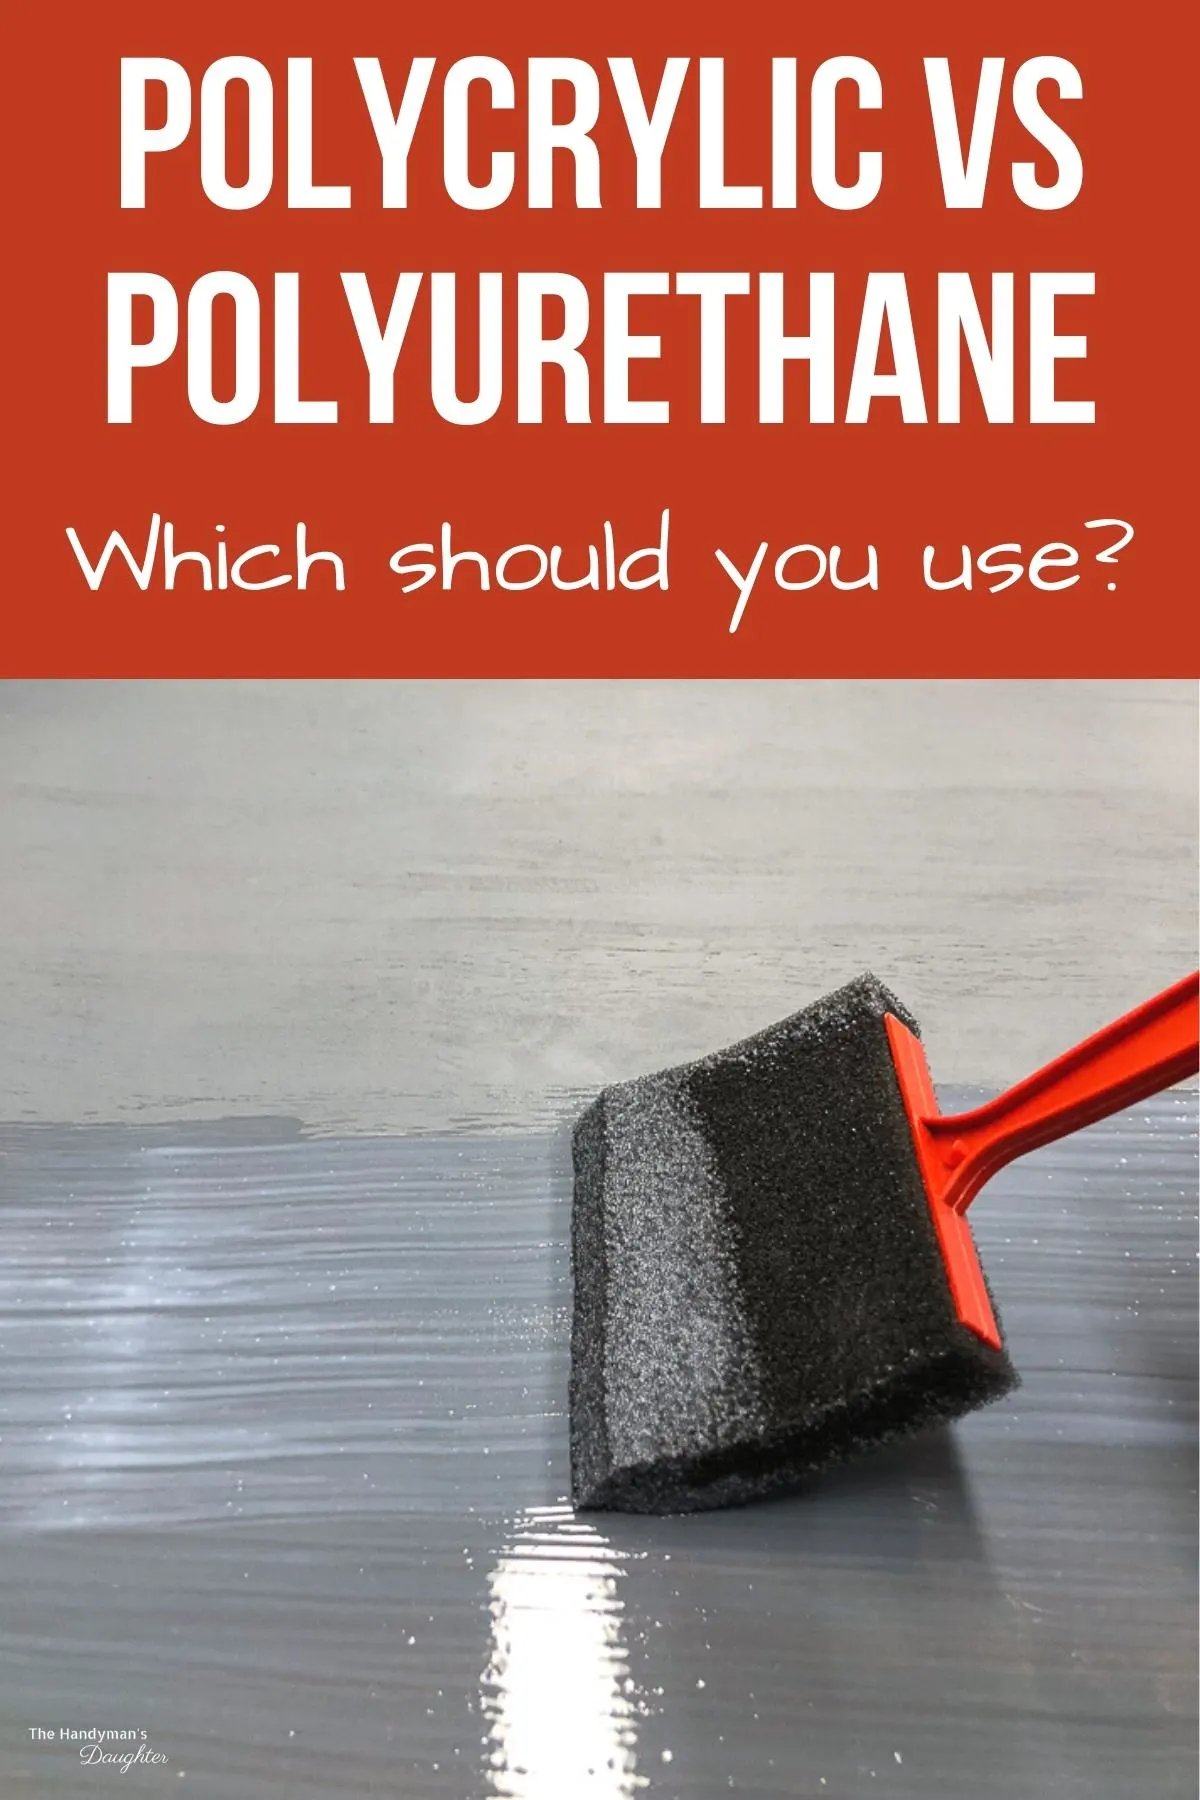 Polycrylic Vs Polyurethane: What's The Difference?